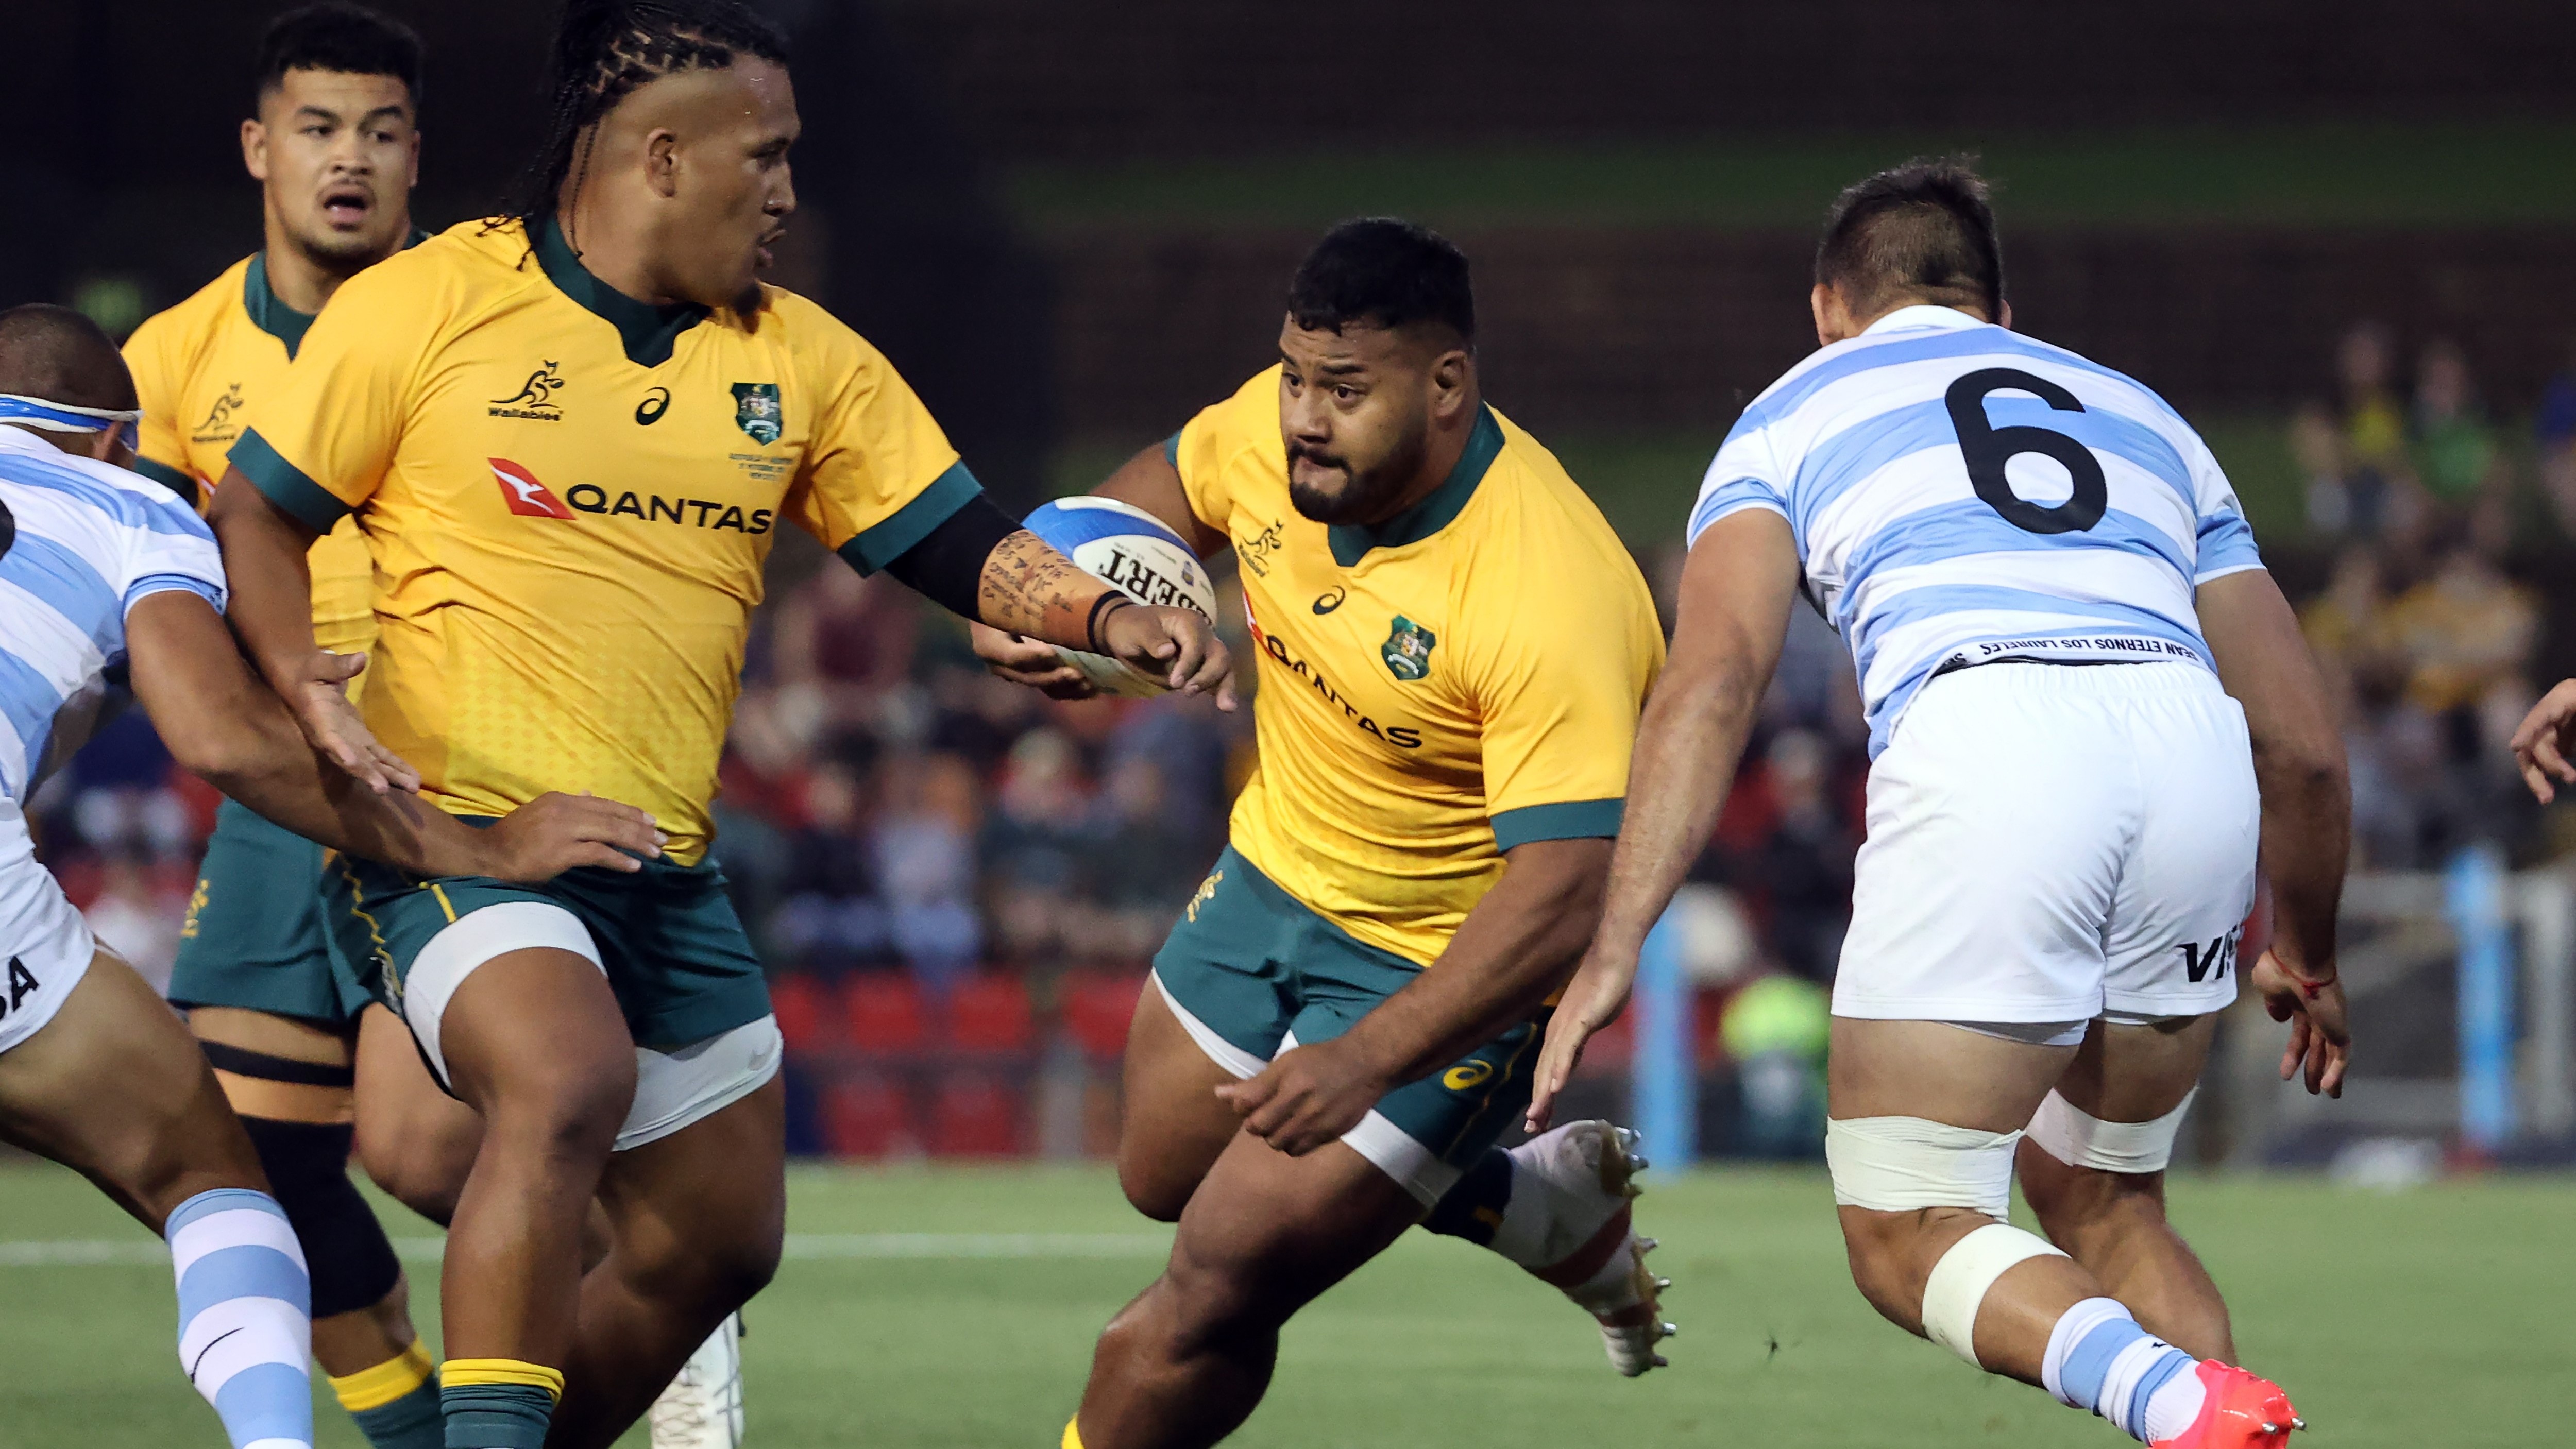 Australia vs Argentina live stream how to watch Tri-Nations 2020 rugby anywhere today TechRadar